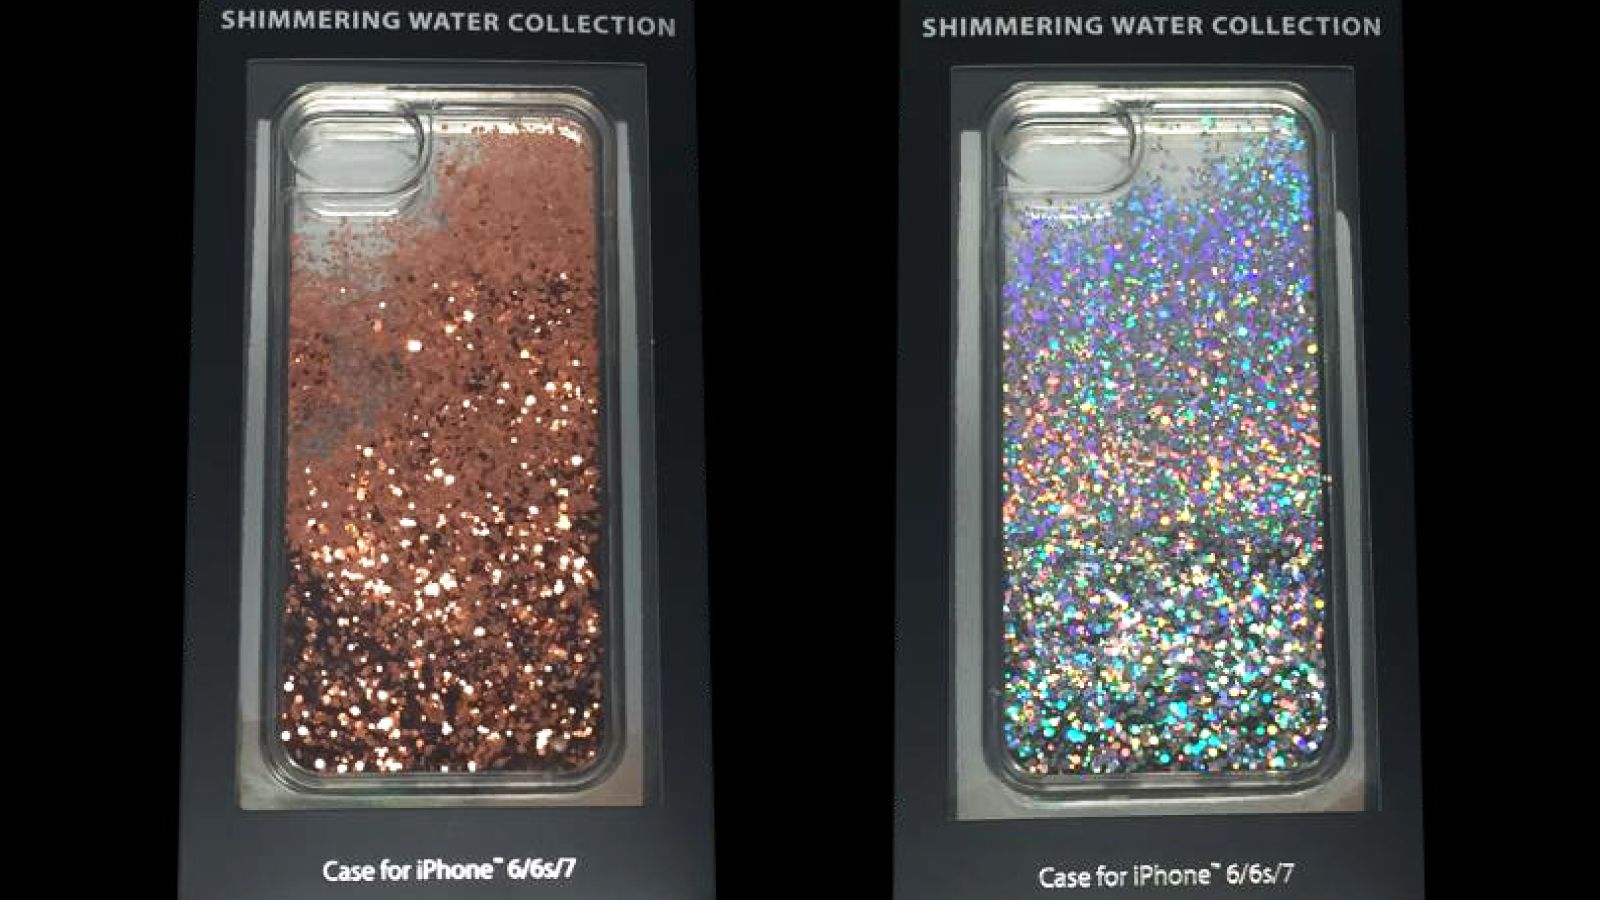 iPhone cases recalled after reports of chemical burns | CNN